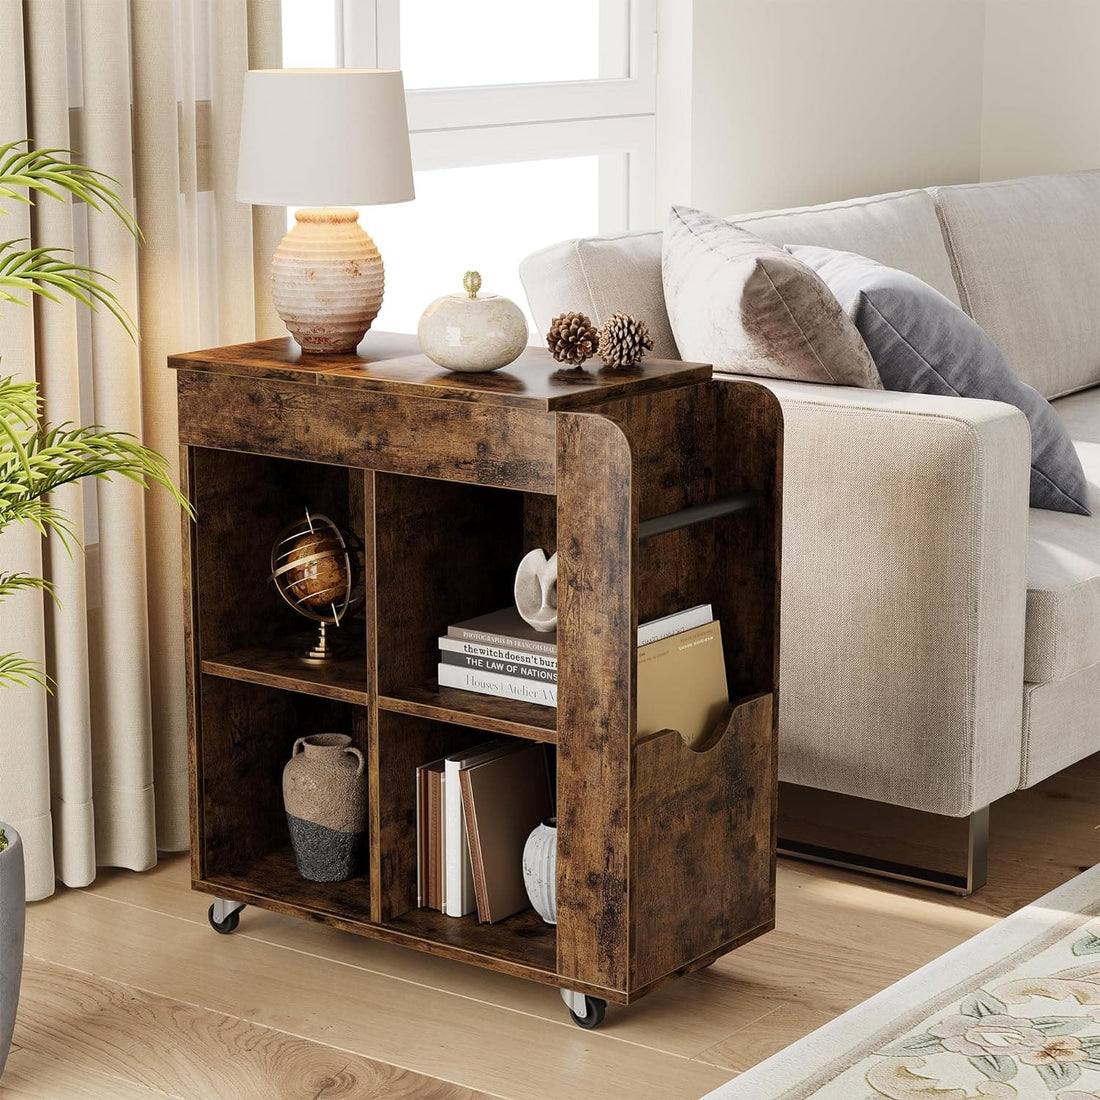 Side Table with Storage, Flip Top Sofa End Table for Living Room and Bedroom, Wood Side Table with 3 Tier Storage Shelf for Small Spaces-Rustic Brown